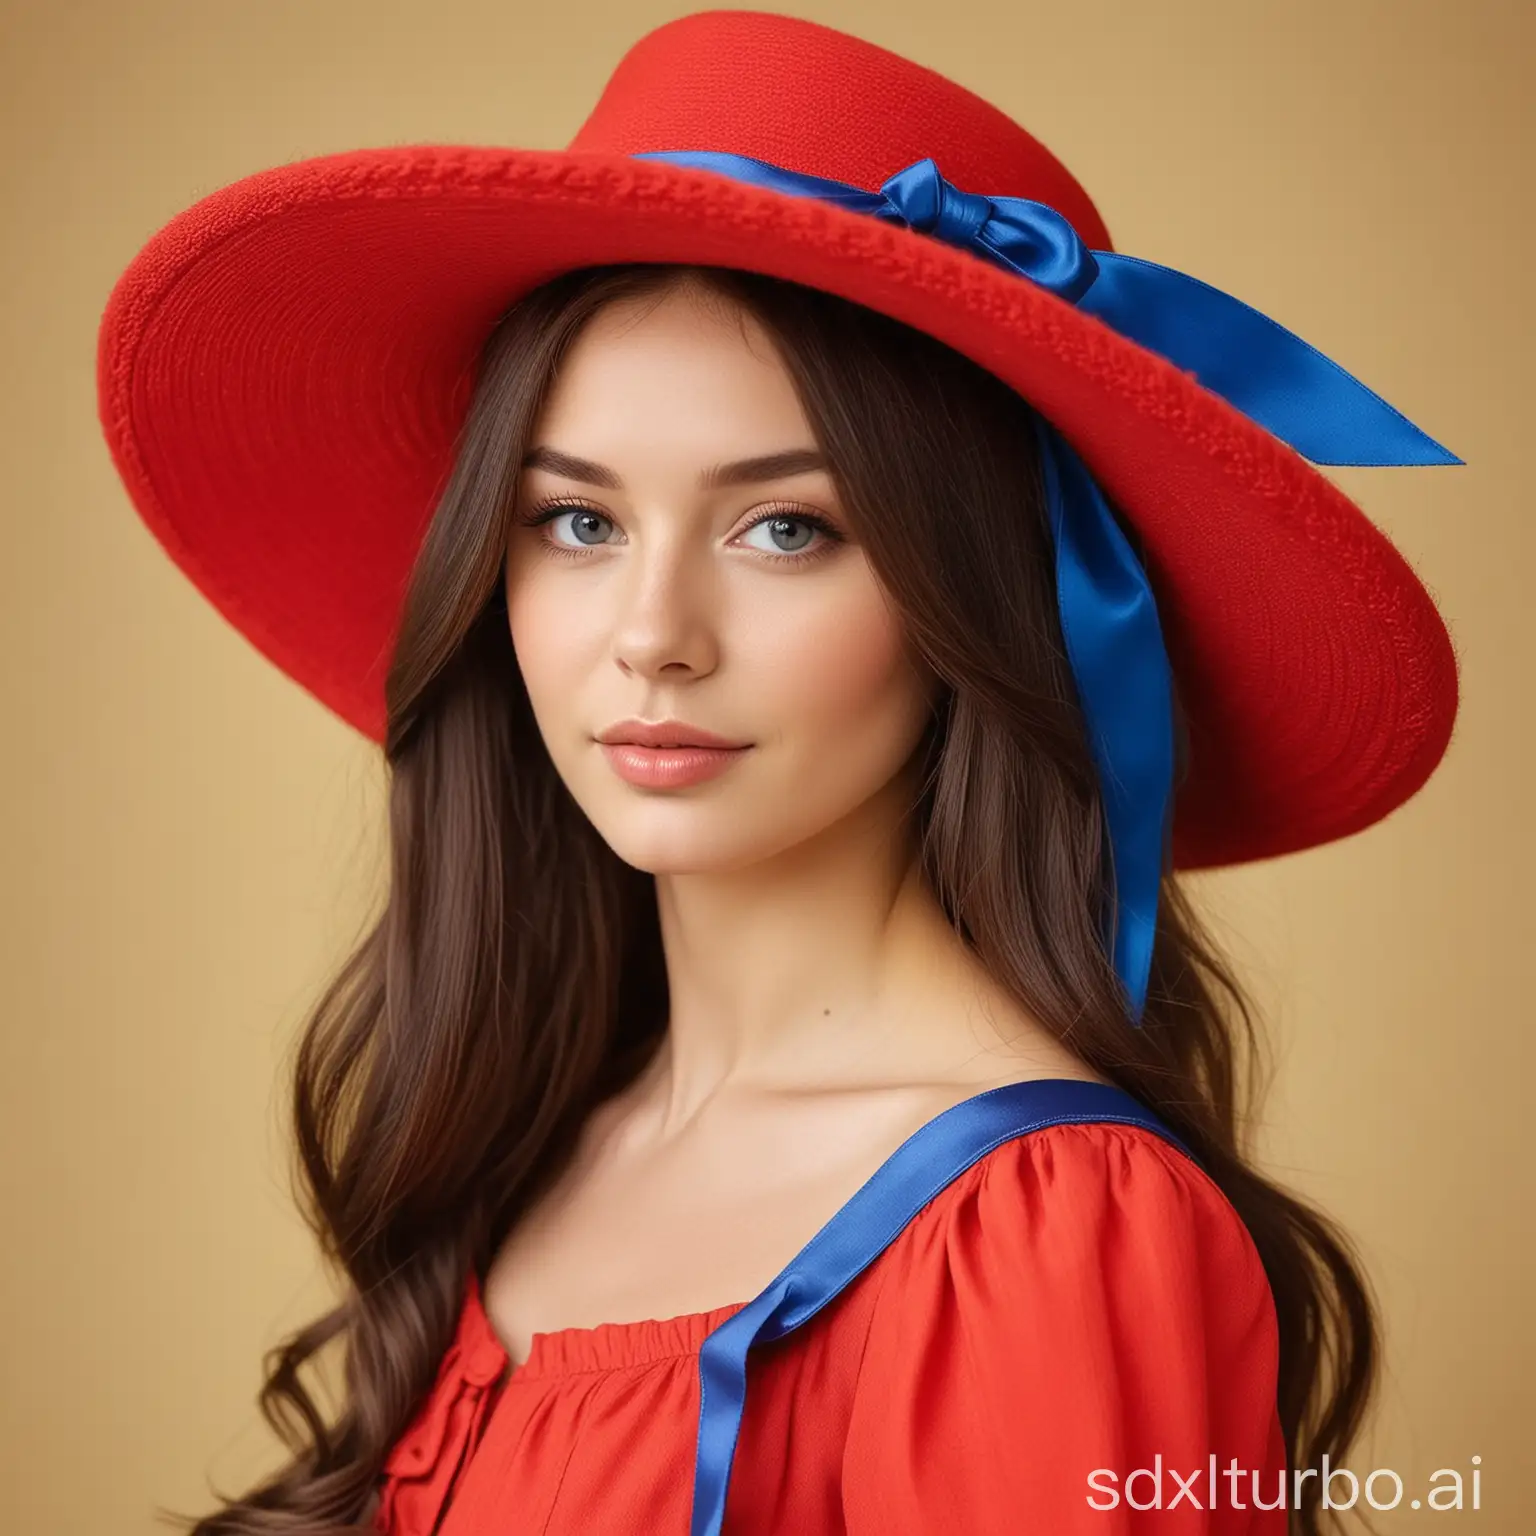 fancy adult lady red dress pretty red hat with blue ribbon with long hair wearing modest clothing has face with yellowish undertone yellowish face no blush no makeup natural